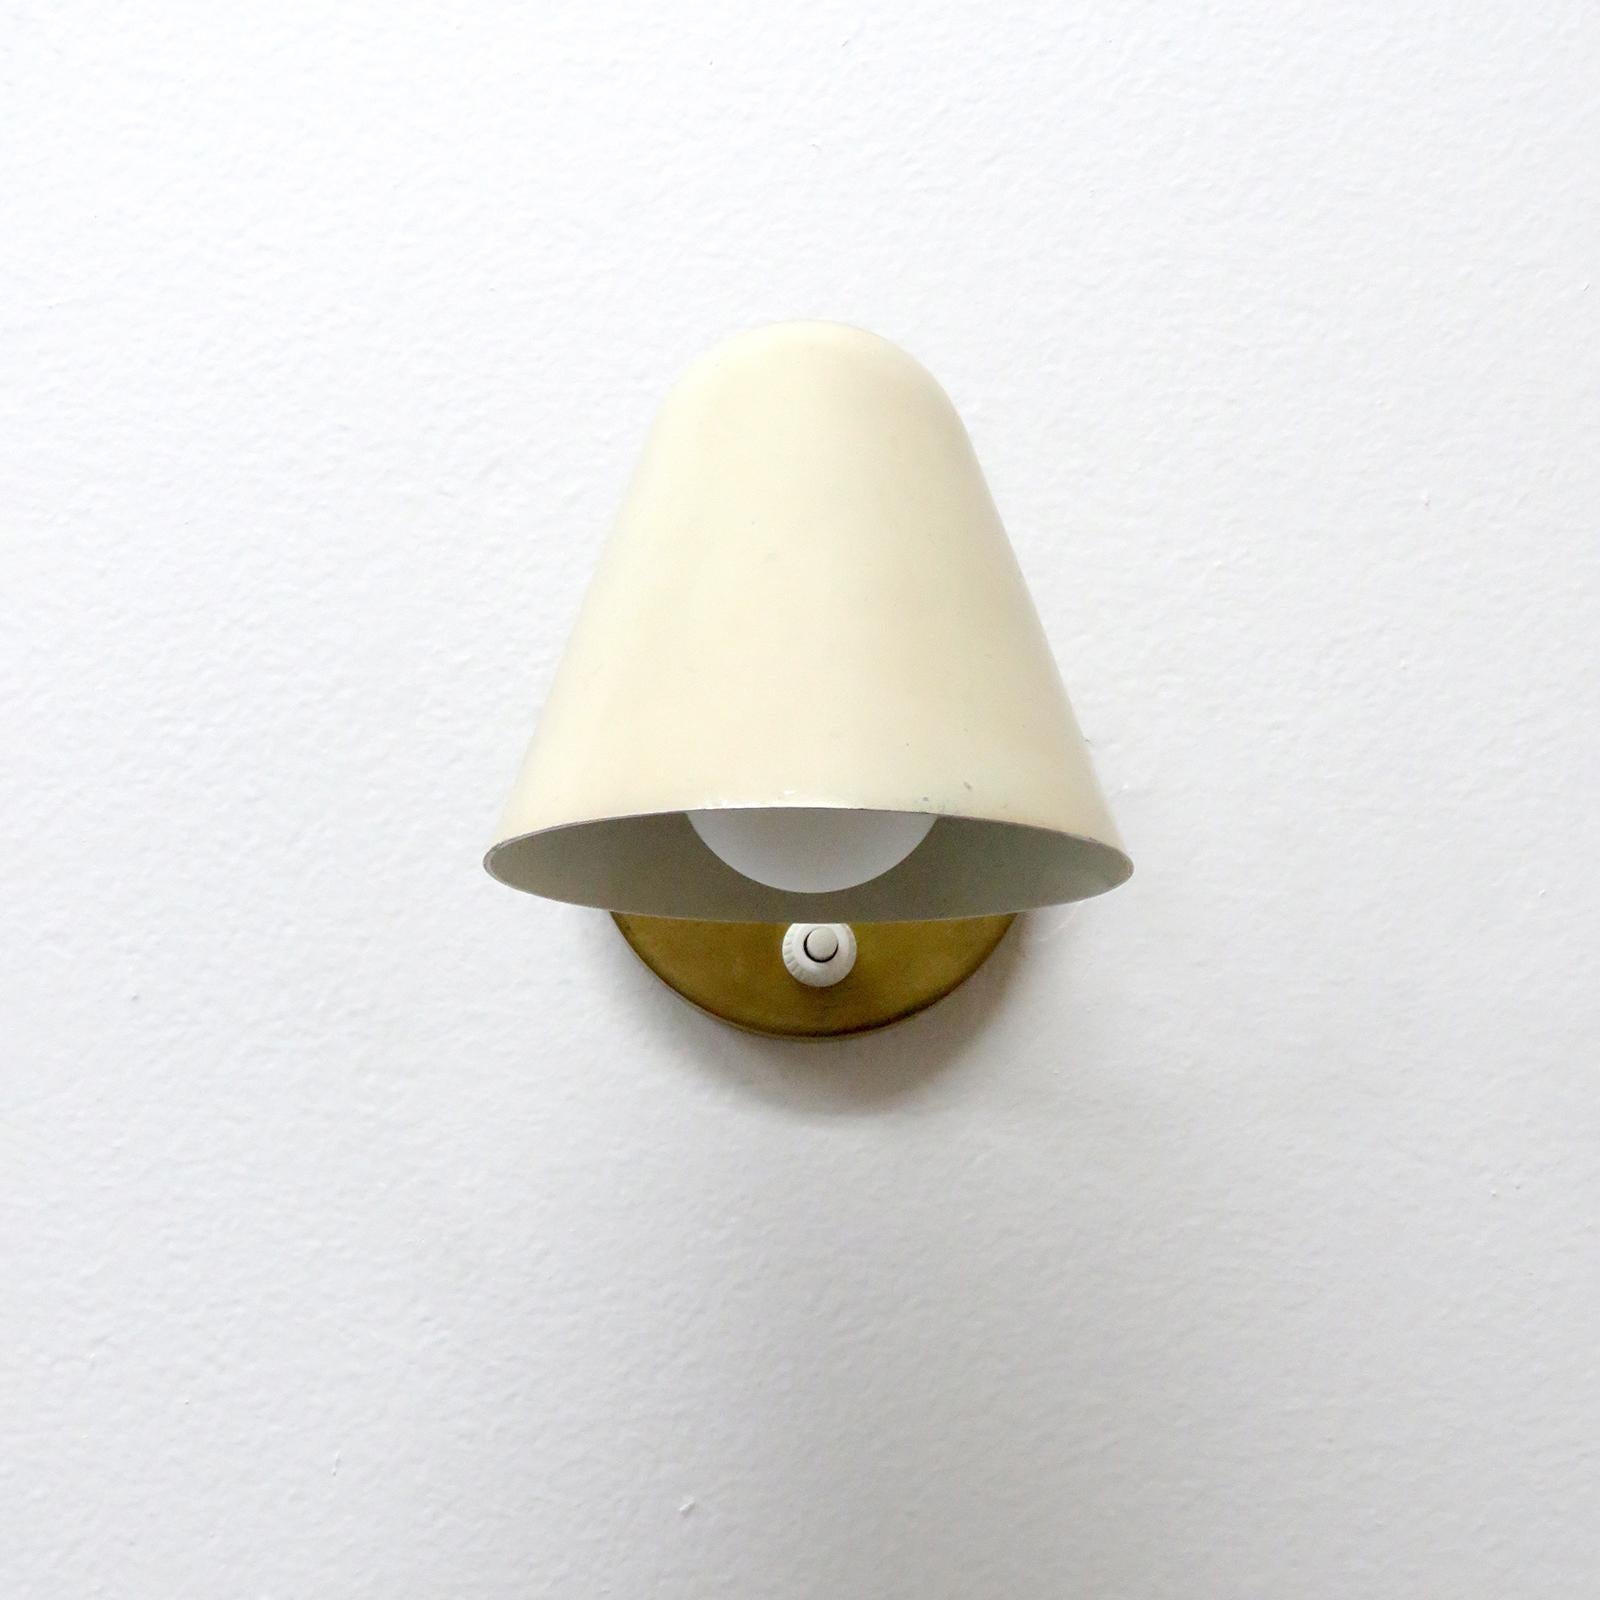 Elegant, petite Jacques Biny wall light, in brass with wonderful egg shell enameled shade, original back plate with individual light switch, mounted on ball joint for full shade rotation, wired for US standards, one E12 socket, max. wattage 60w or